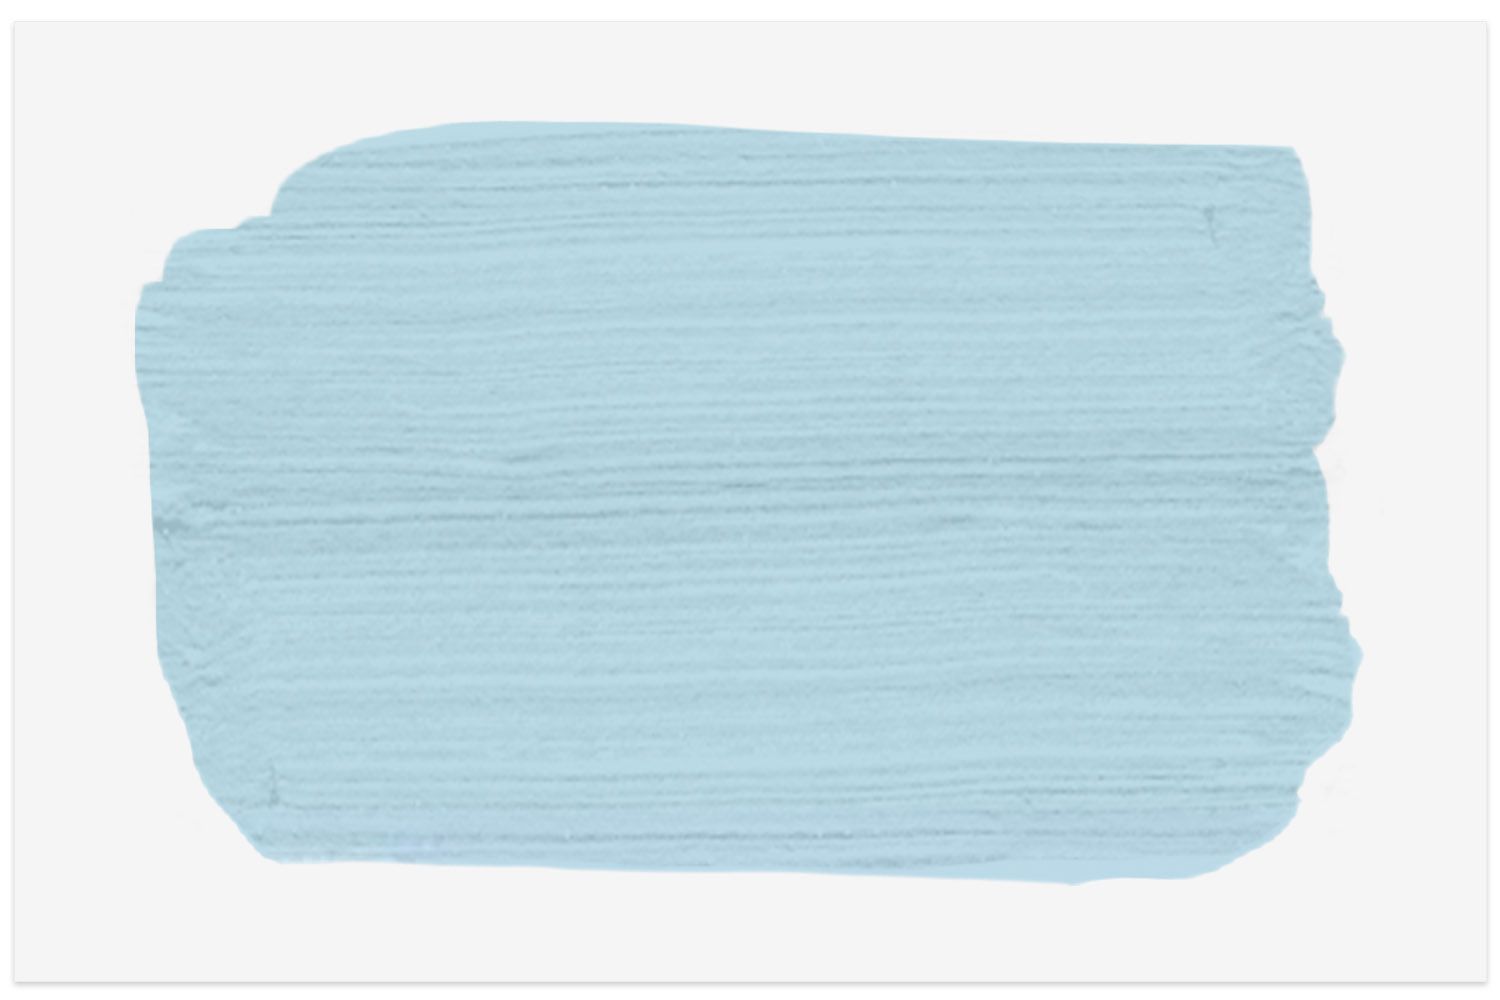 Behr Serene Sky paint swatch for ceiling color inspiration